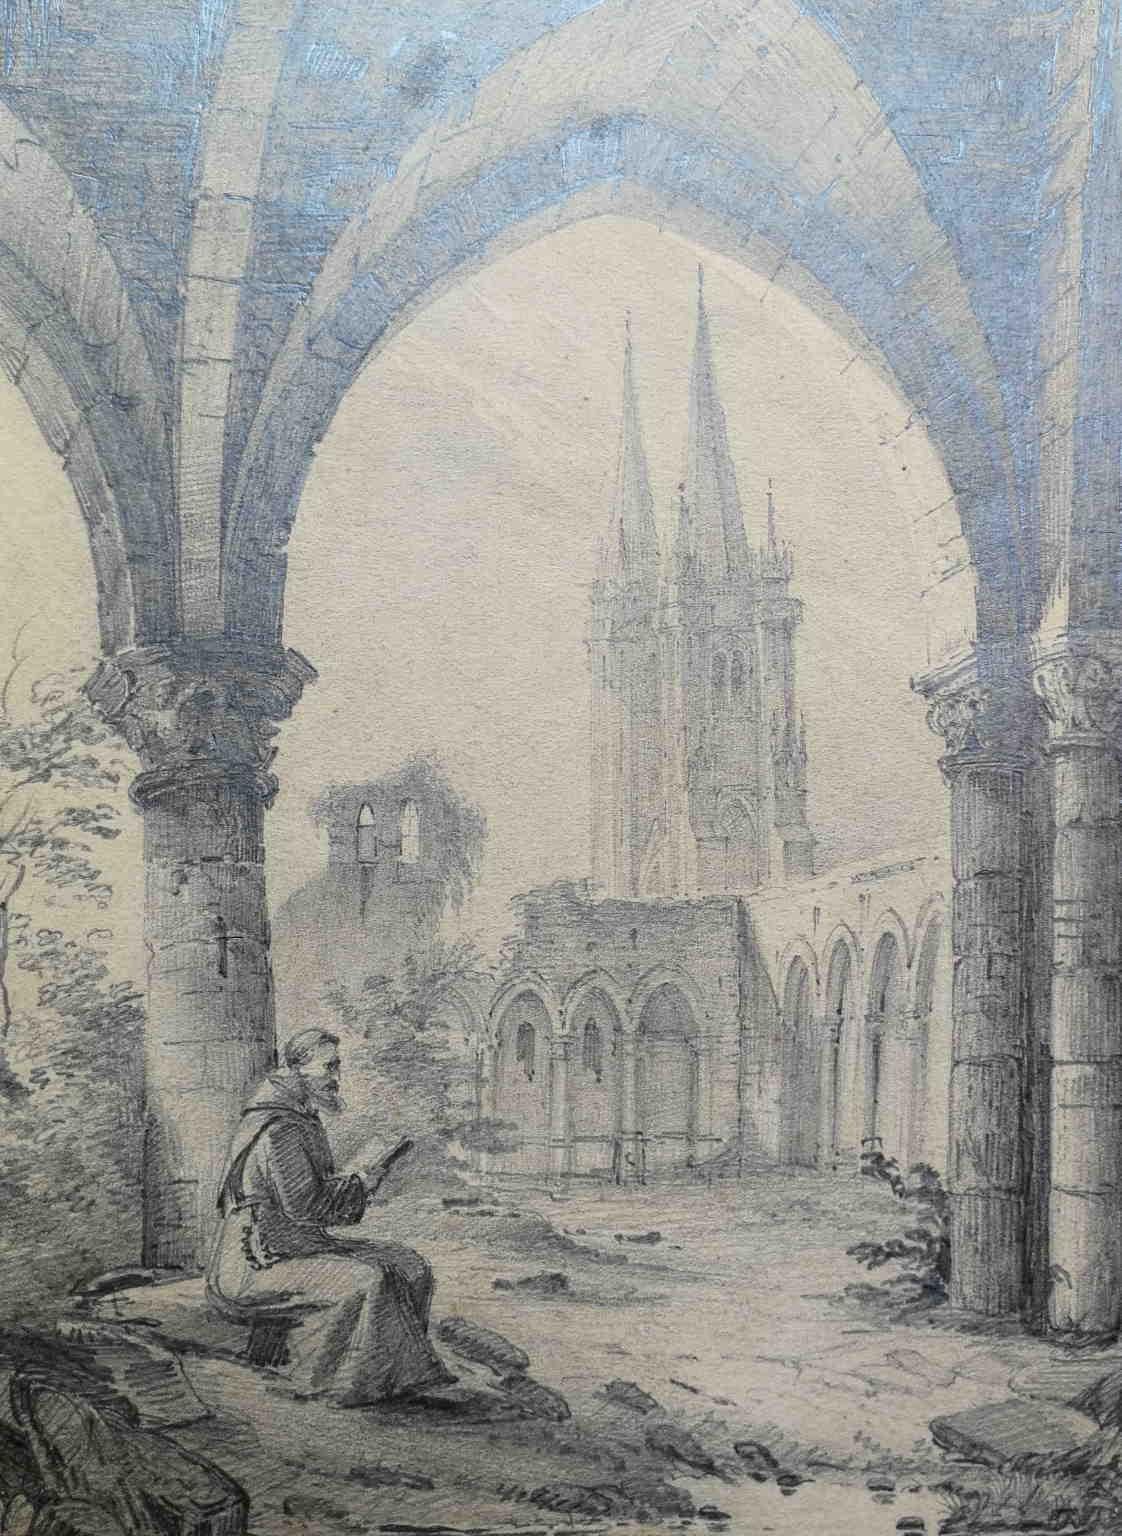 This drawing represents a lateral view over the Cathedral of Koln that doesn't want to be a faithfull copy from real but It's pervaded with a nostalgic and decadent feeling proper of the Romanticism. In fact, the artist, also displays some ruins